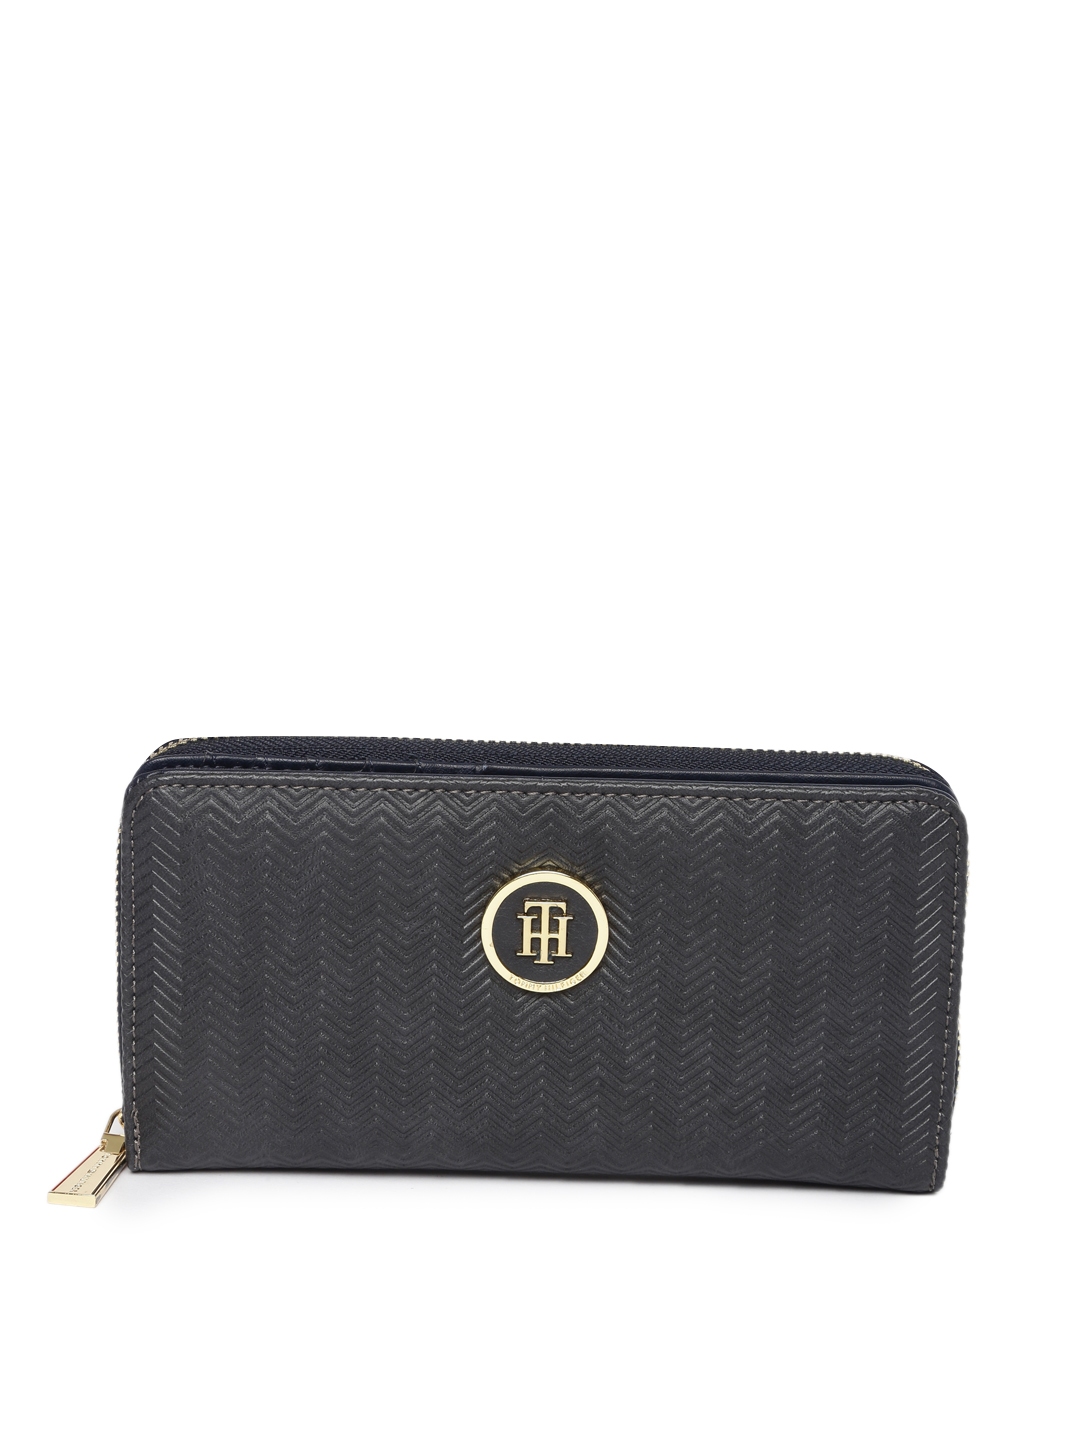 Buy Tommy Hilfiger Women Grey Textured Two Fold Leather Wallet ...